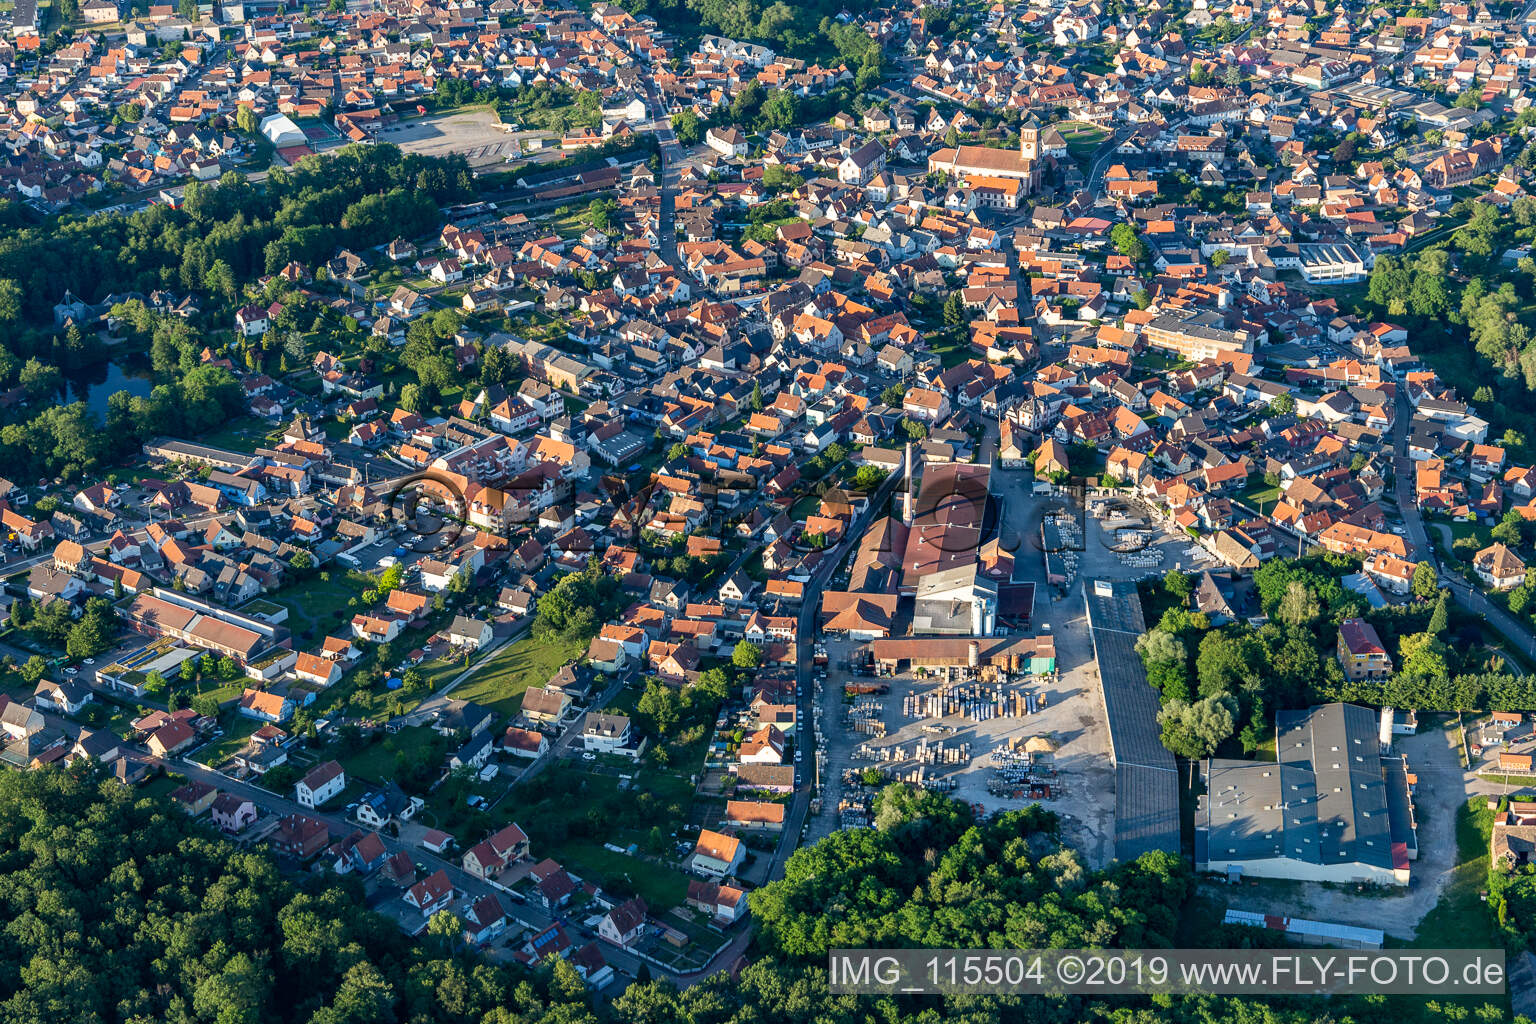 Drone image of Haguenau in the state Bas-Rhin, France